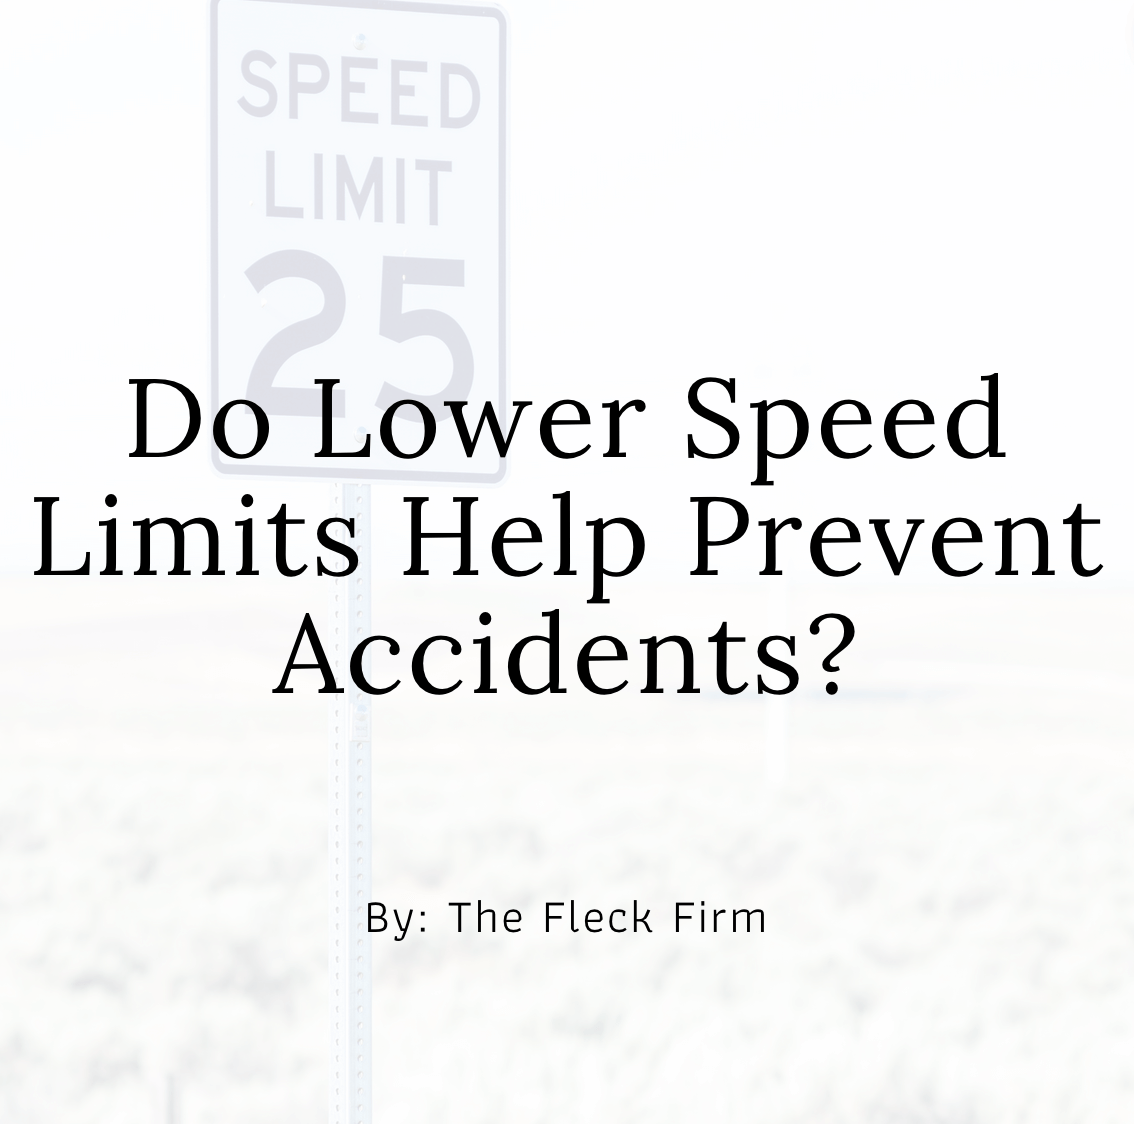 Do lower speed limits help prevent car accidents